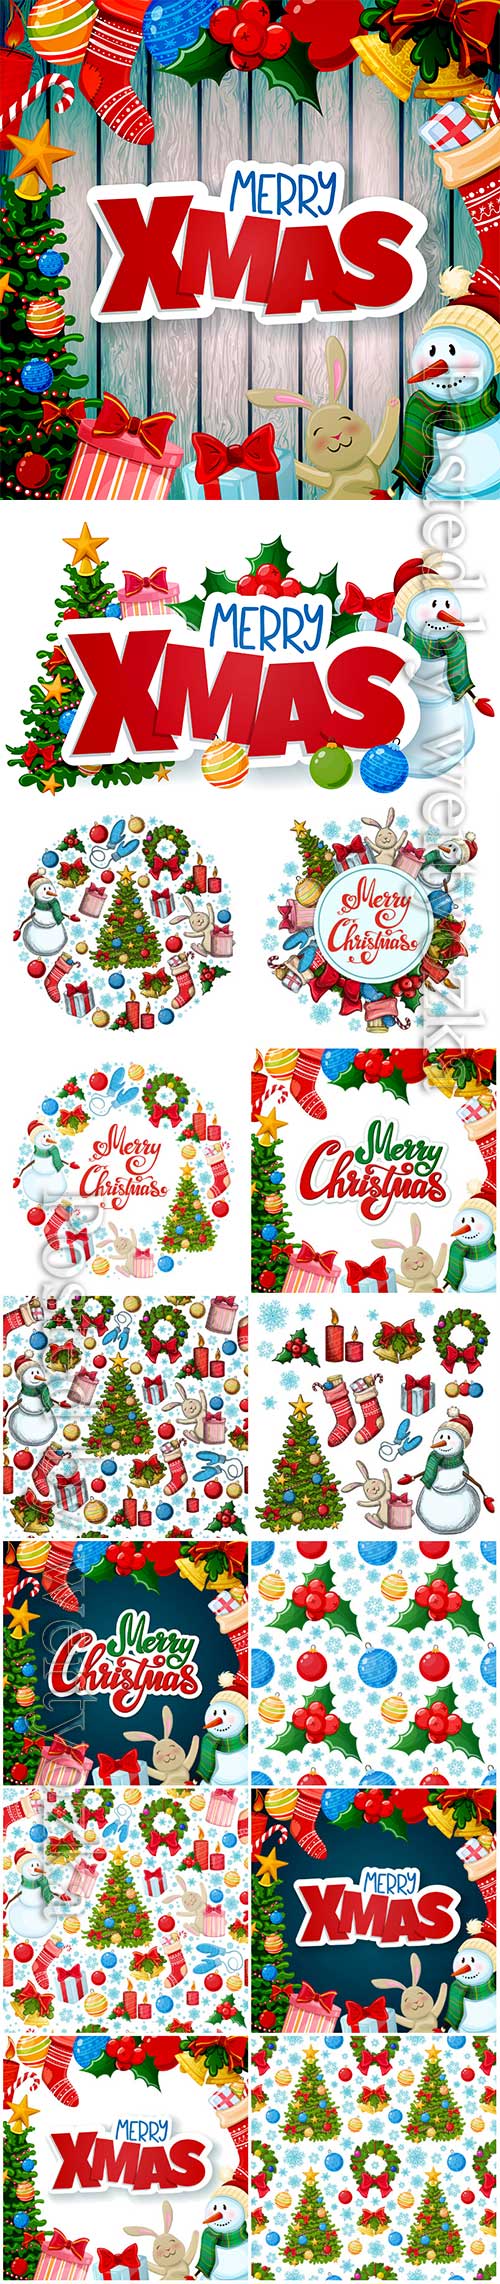 Merry Christmas vector card in decorations